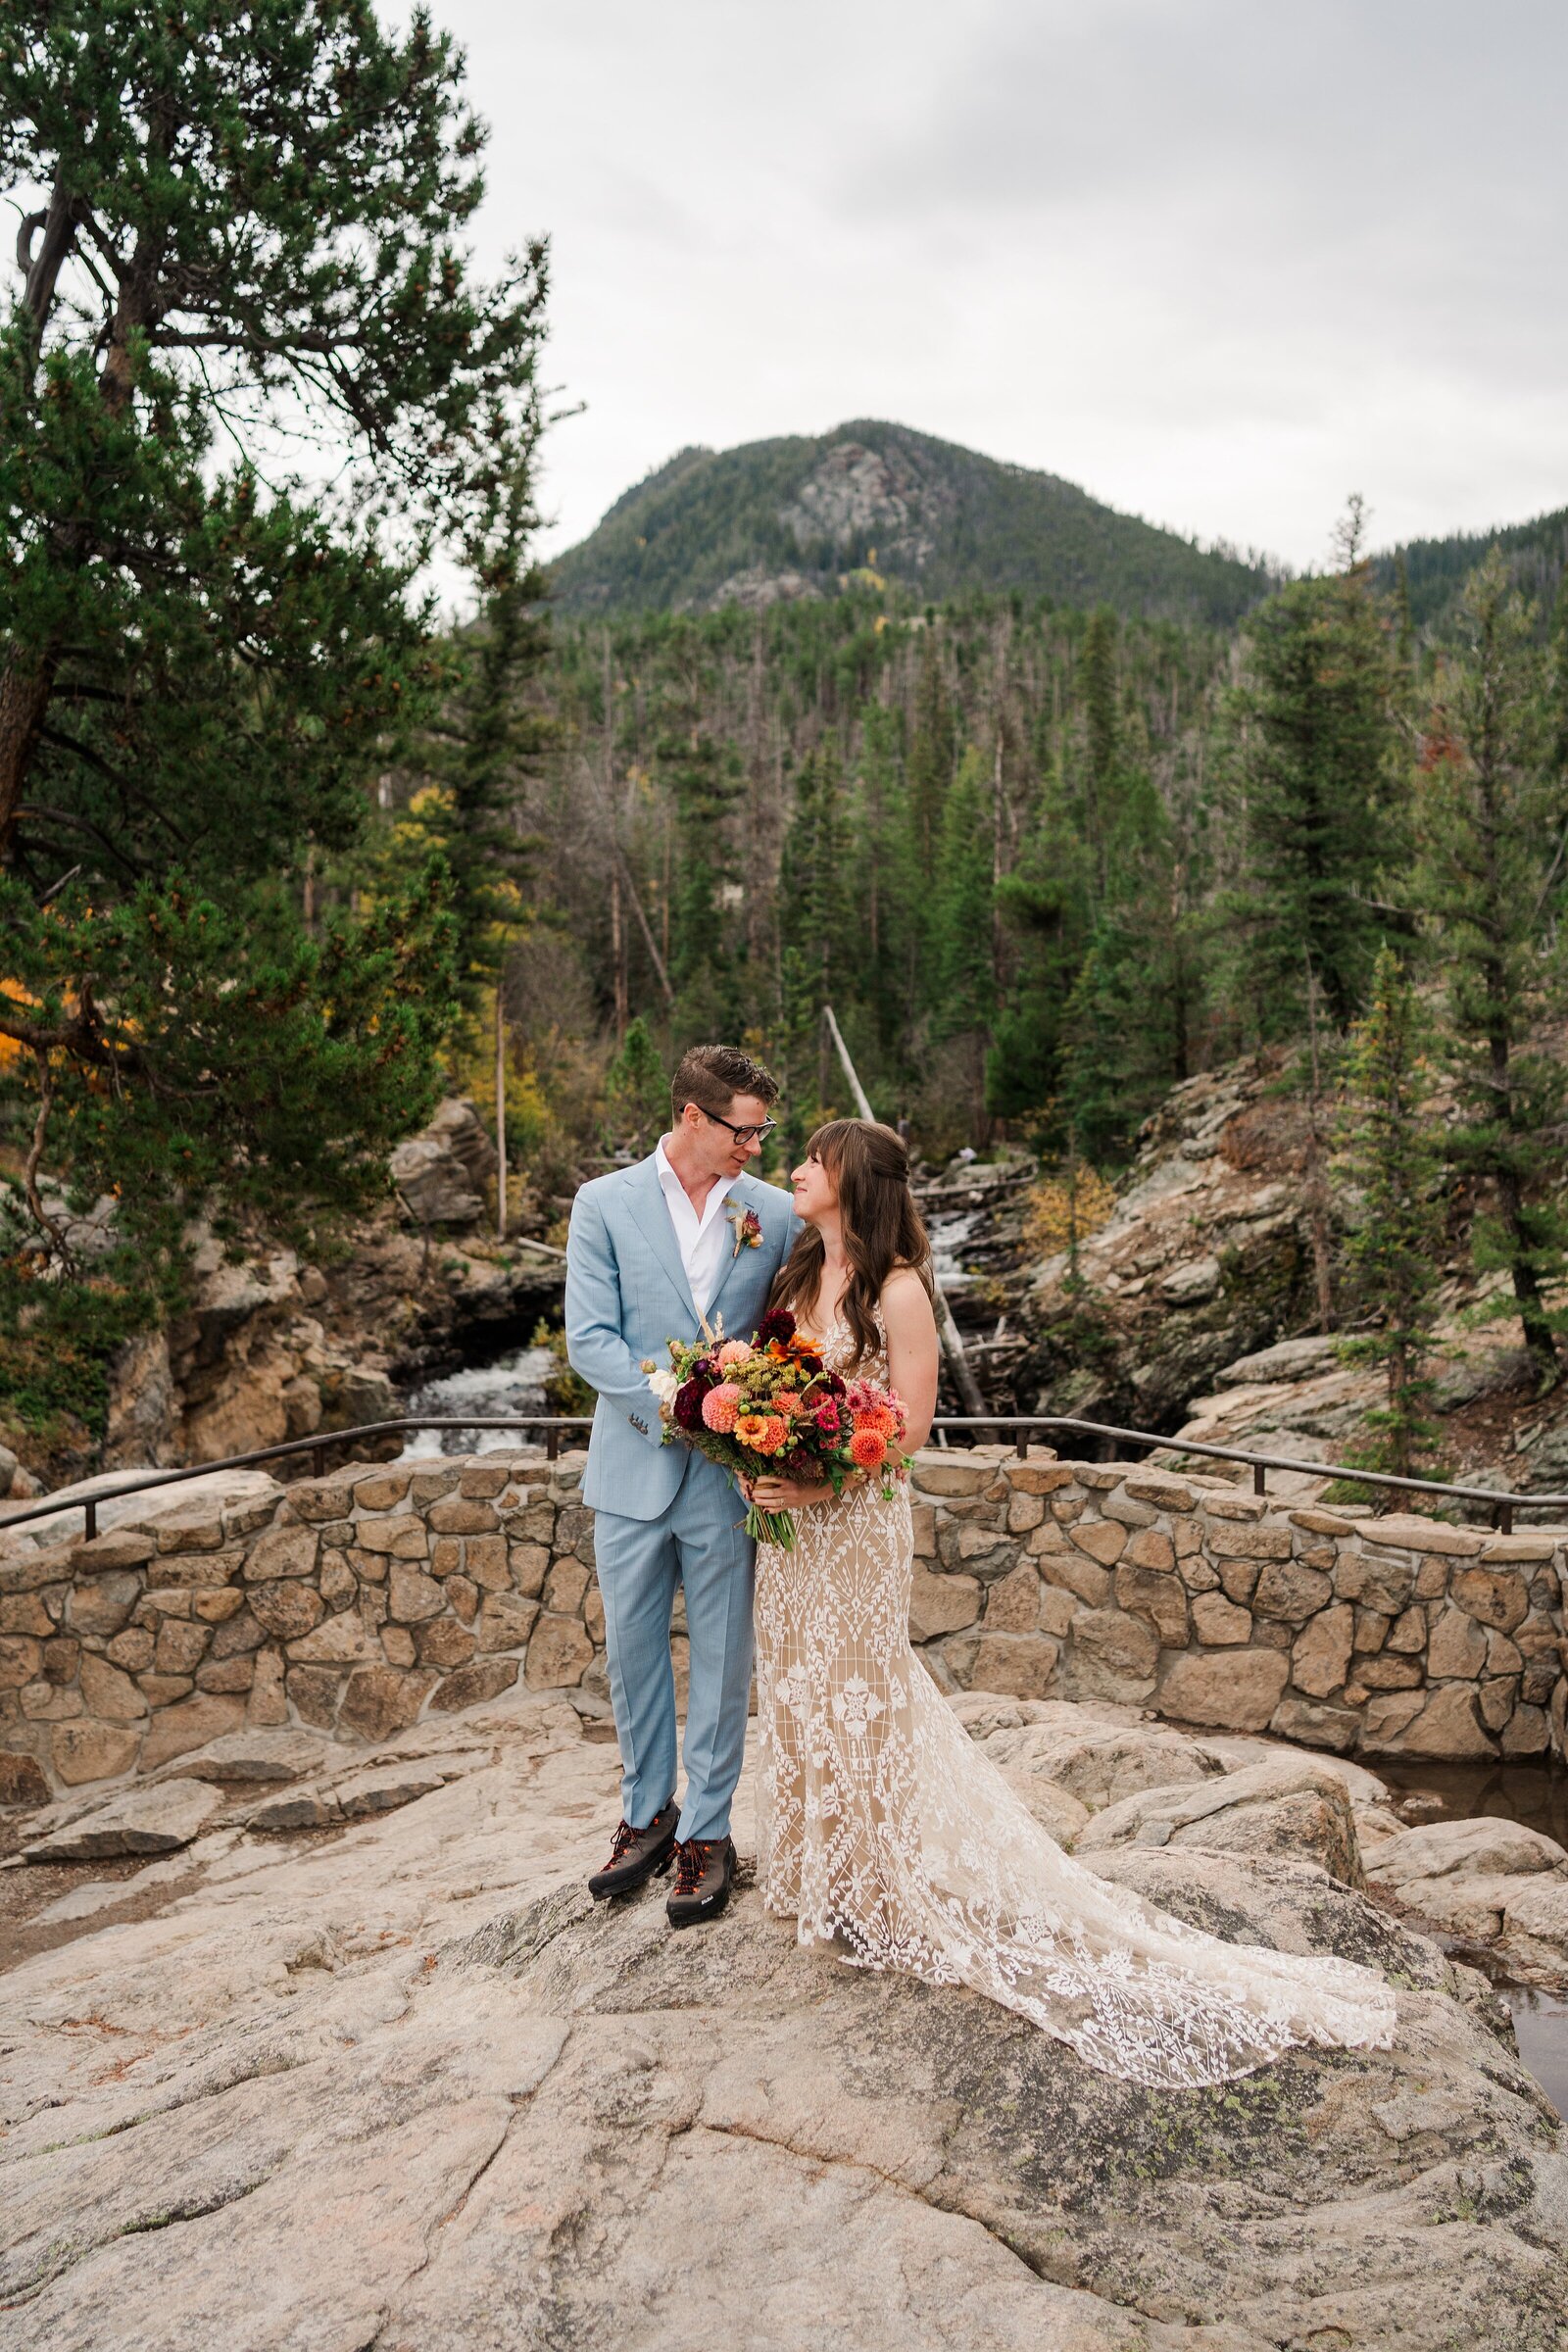 There's nothing quite as romantic as a mountain wedding, and Samantha Immer Photography knows how to capture the beauty and majesty of these special moments. With a focus on stunning scenery and heartfelt emotions, Samantha creates images that showcase the love